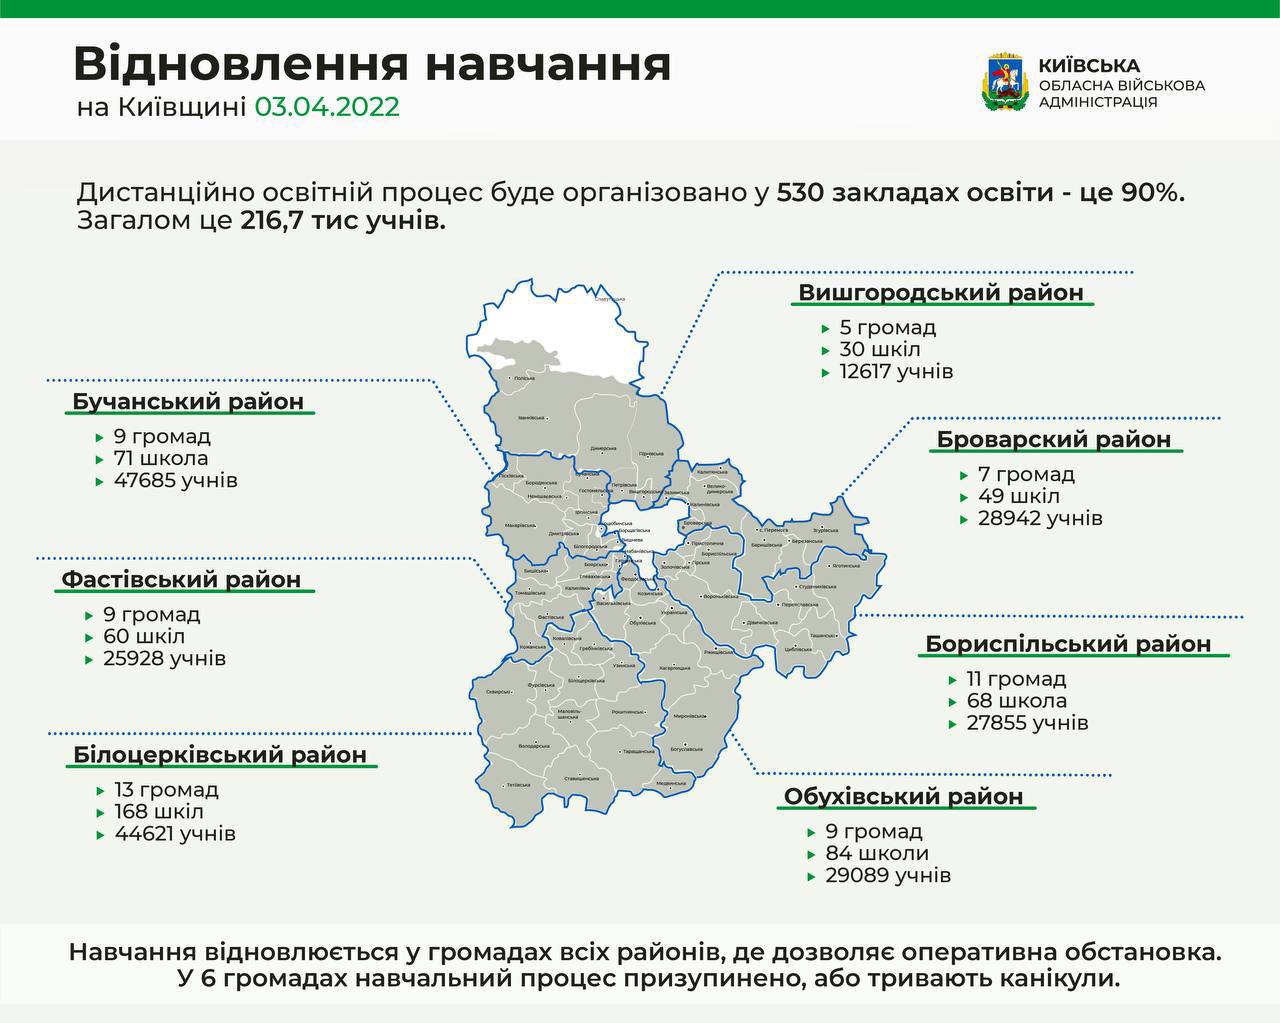 From April 4, 2022, educational institutions of Kyiv region will resume their work